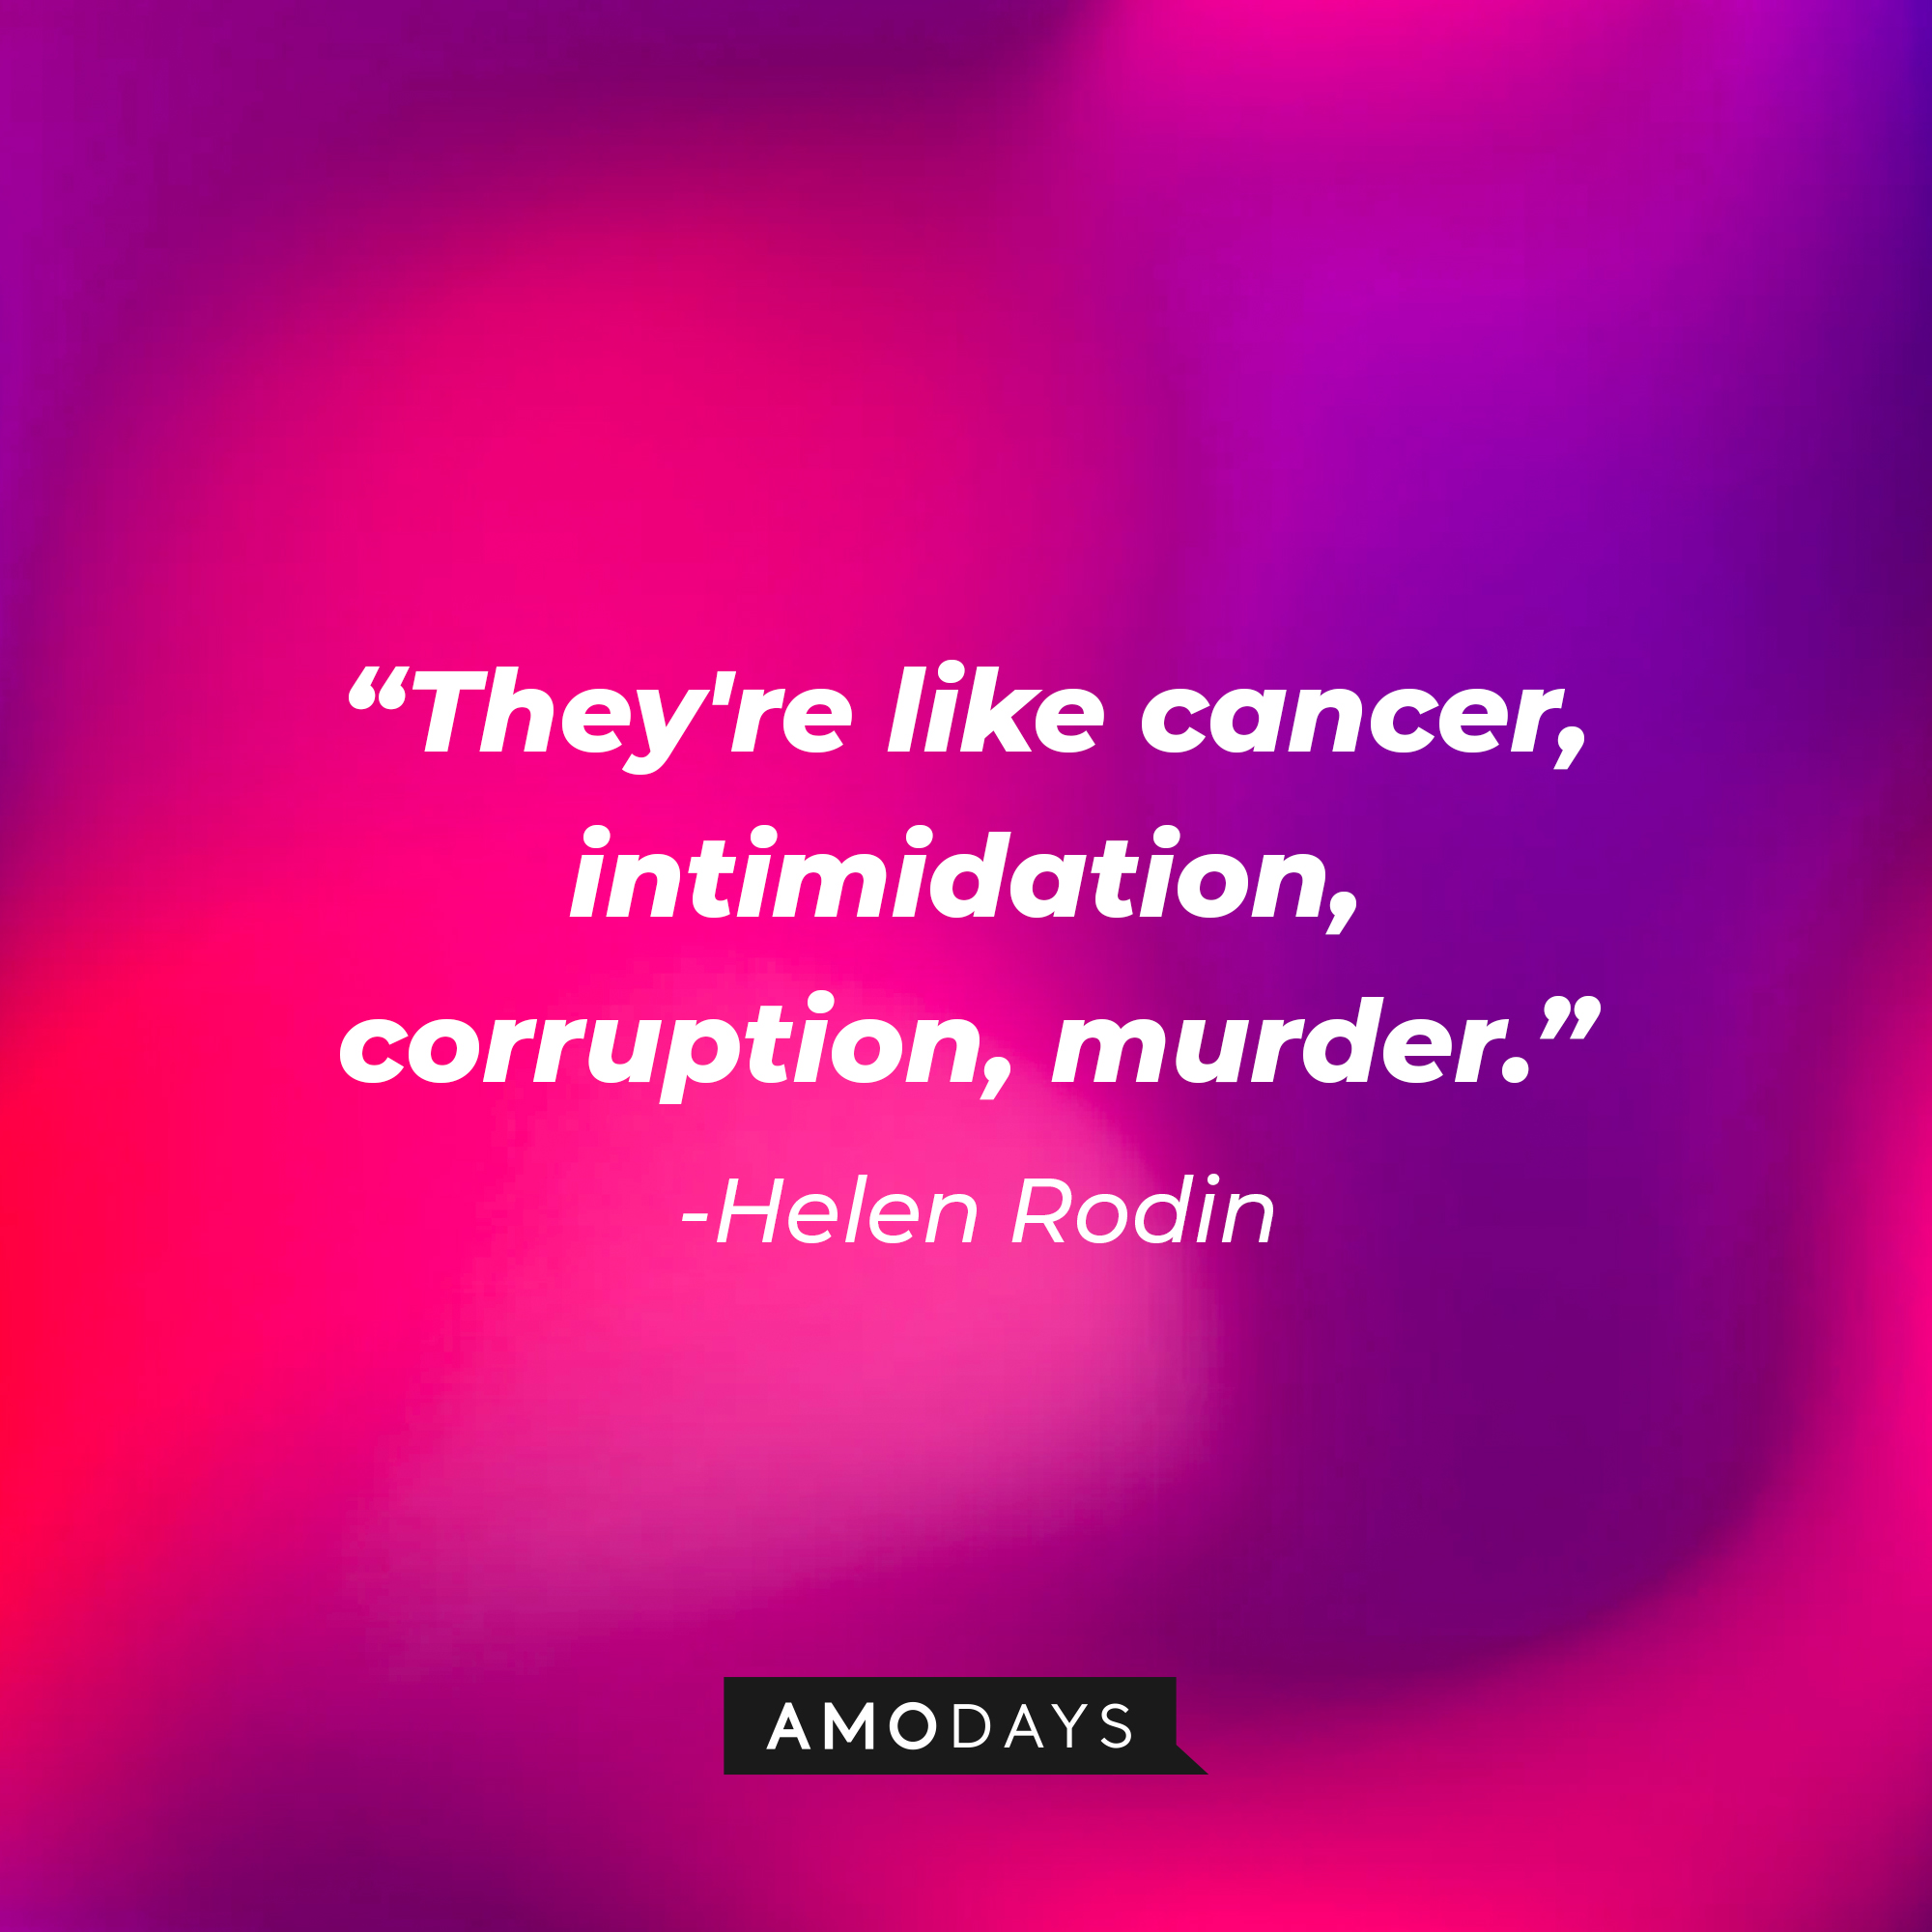 Helen Rodin's quote: "They're like cancer, intimidation, corruption, murder" | Source: Amodays